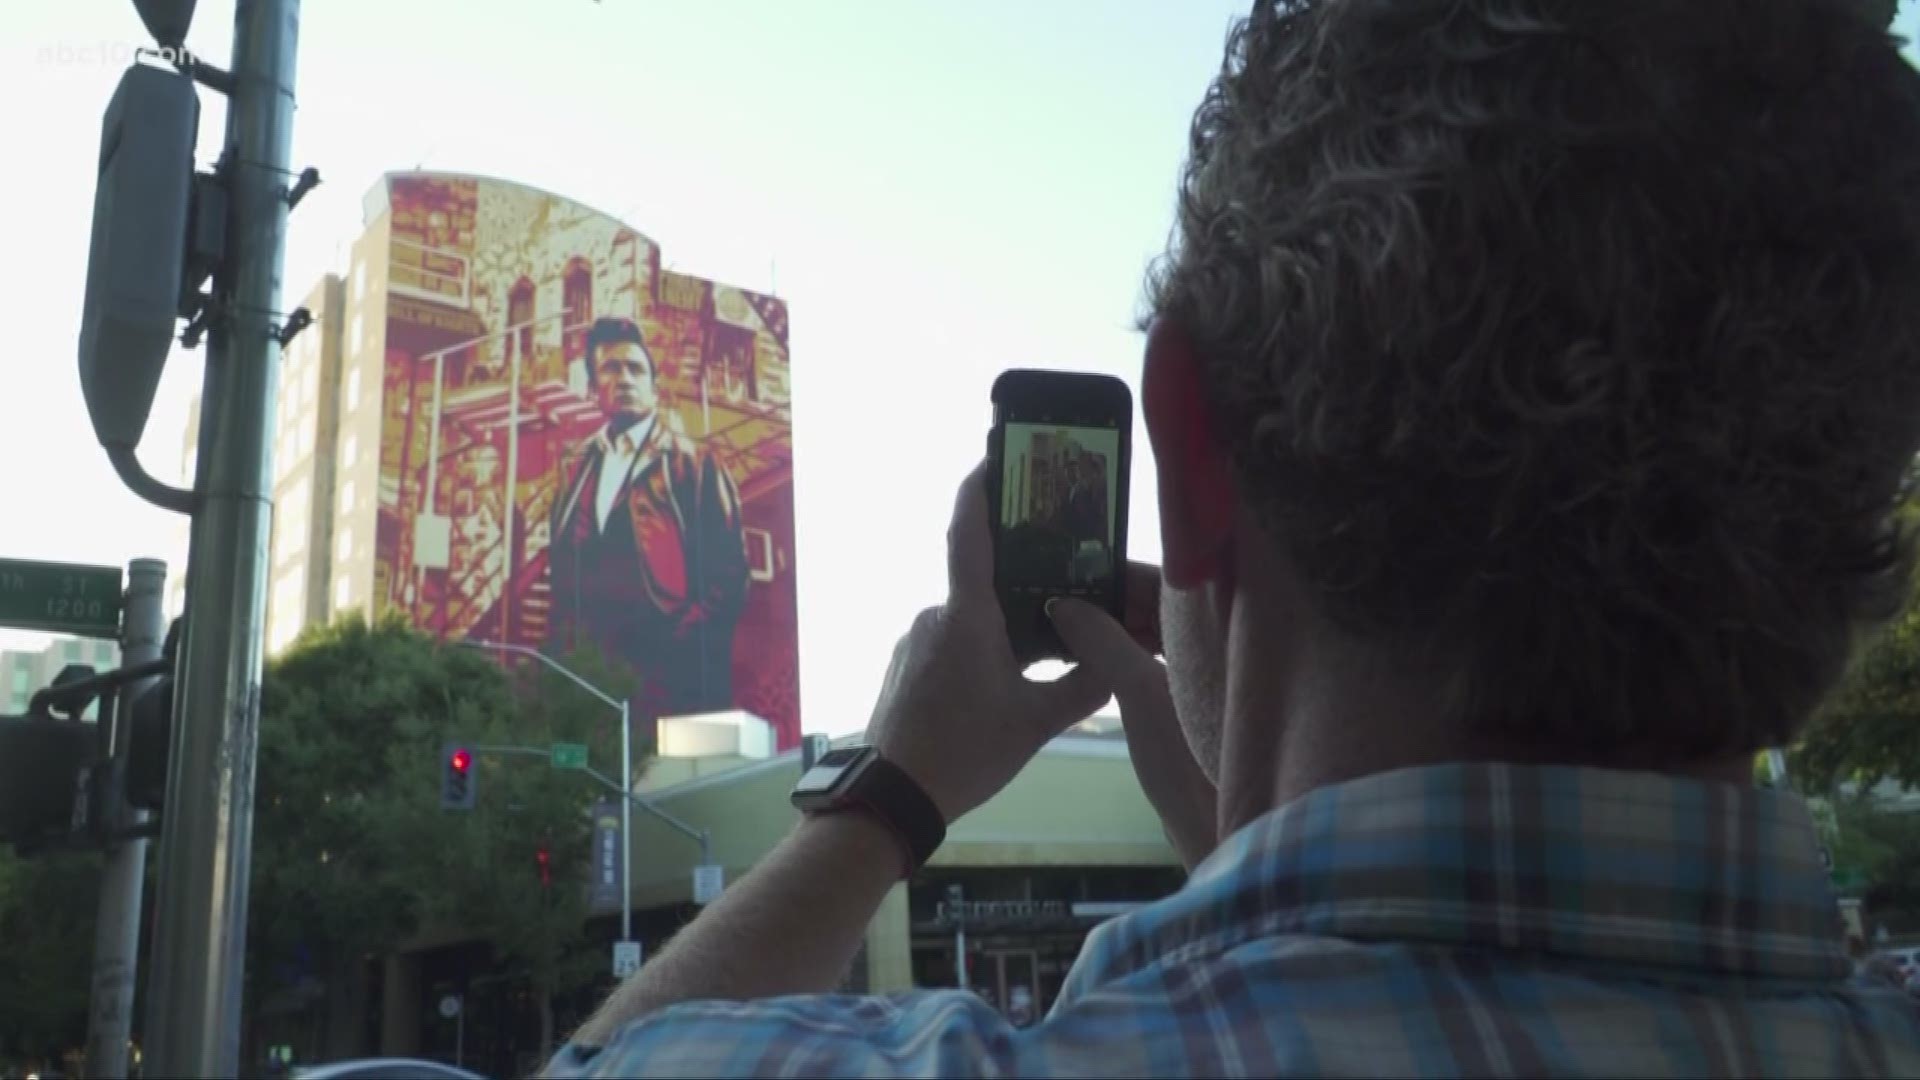 What's the meaning behind the new Johnny Cash mural in Sacramento?